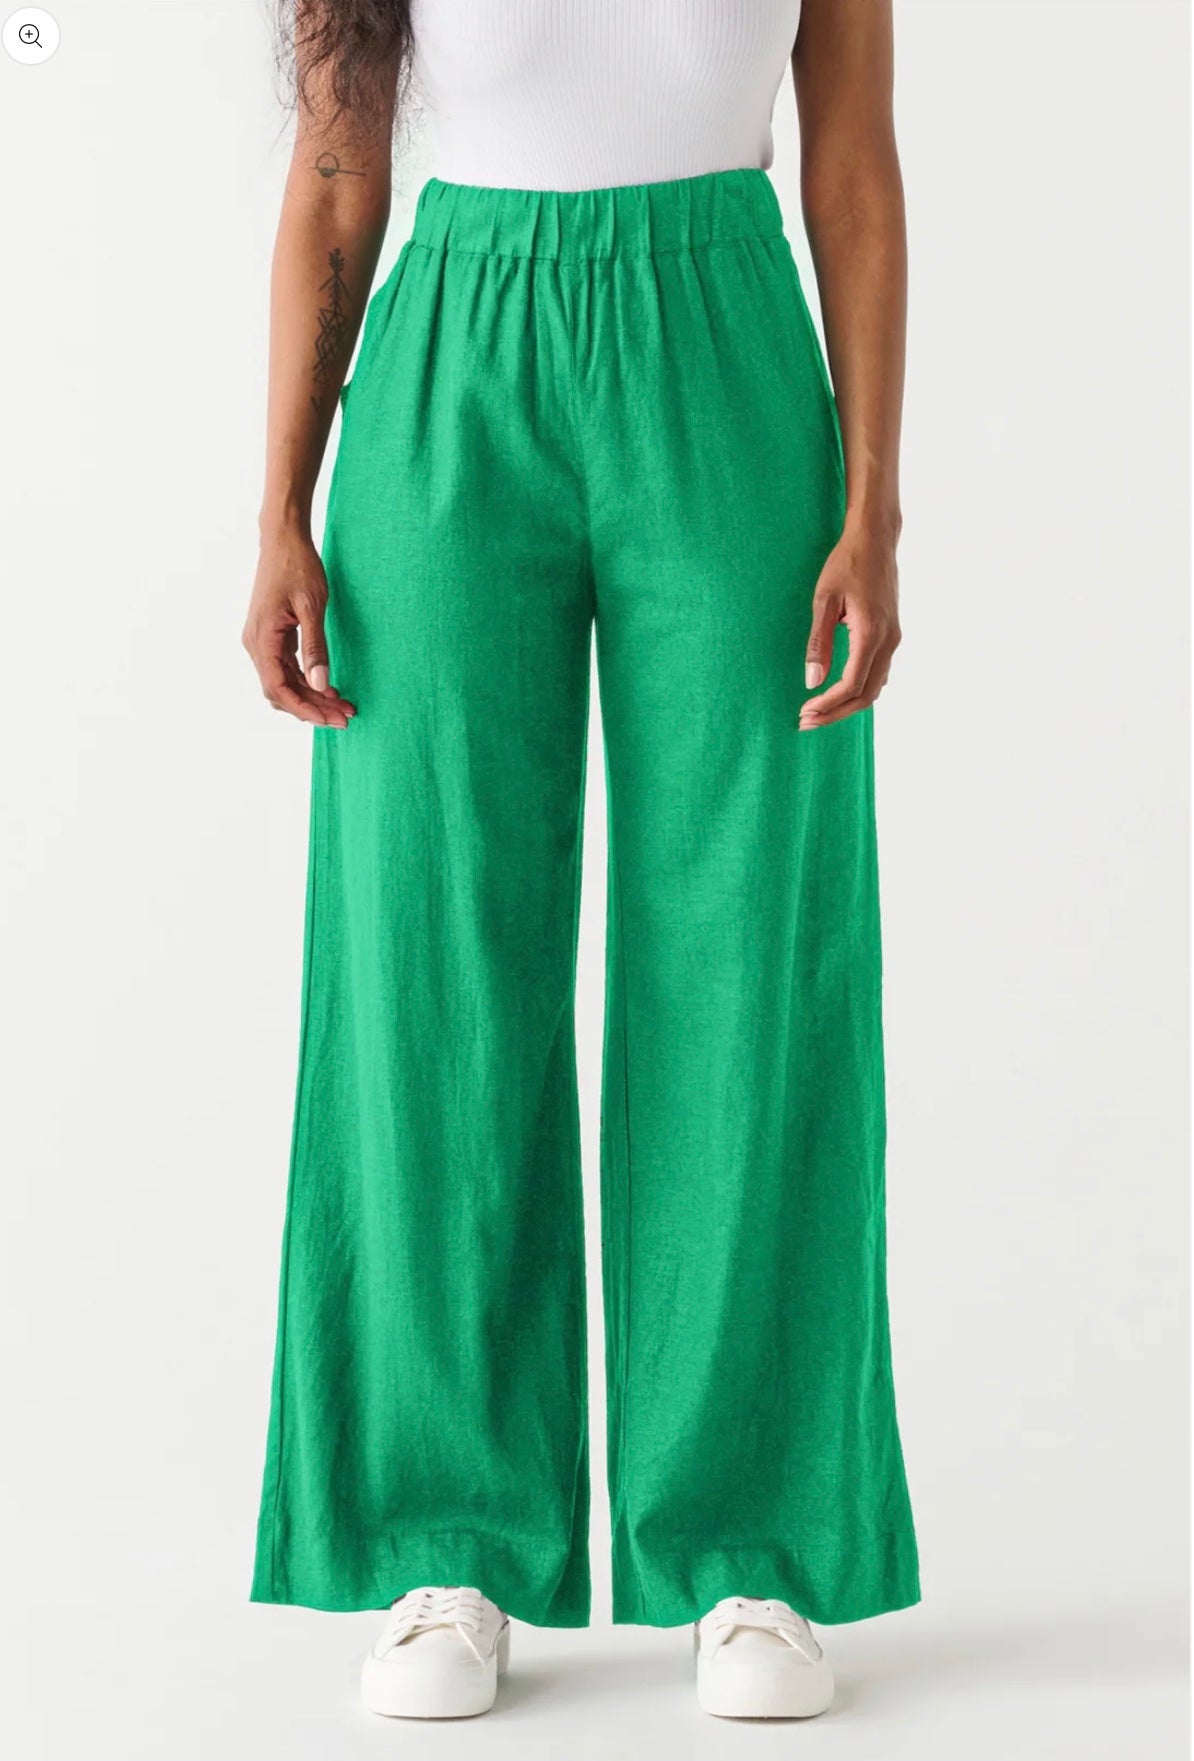 Emerald Pull on Pant